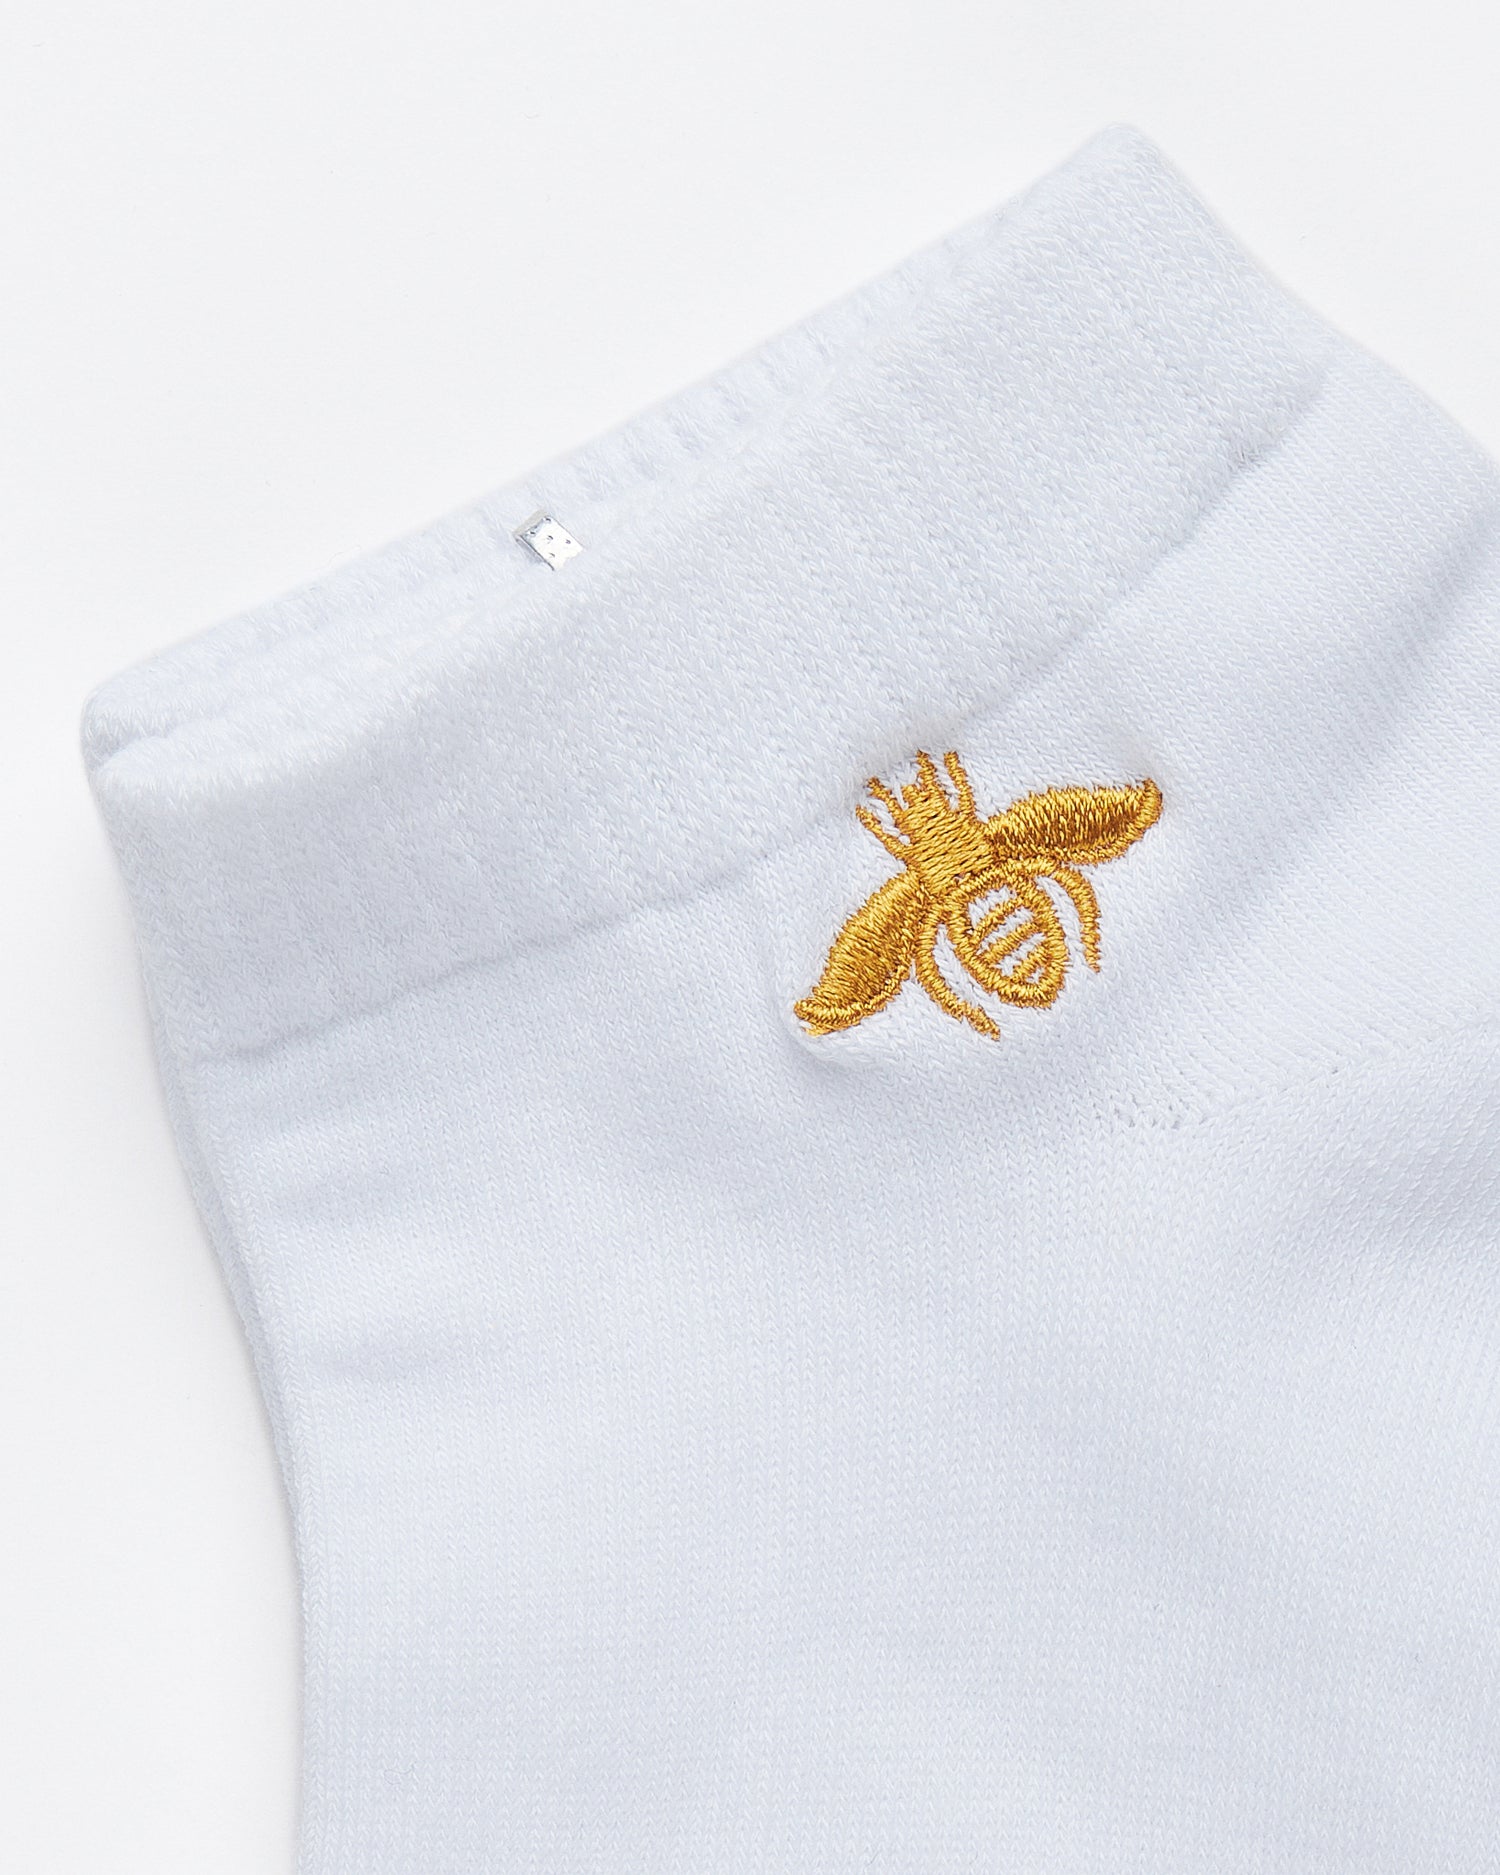 GUC Bee Embroidered White Low Cut 1 Pairs Socks 1.90